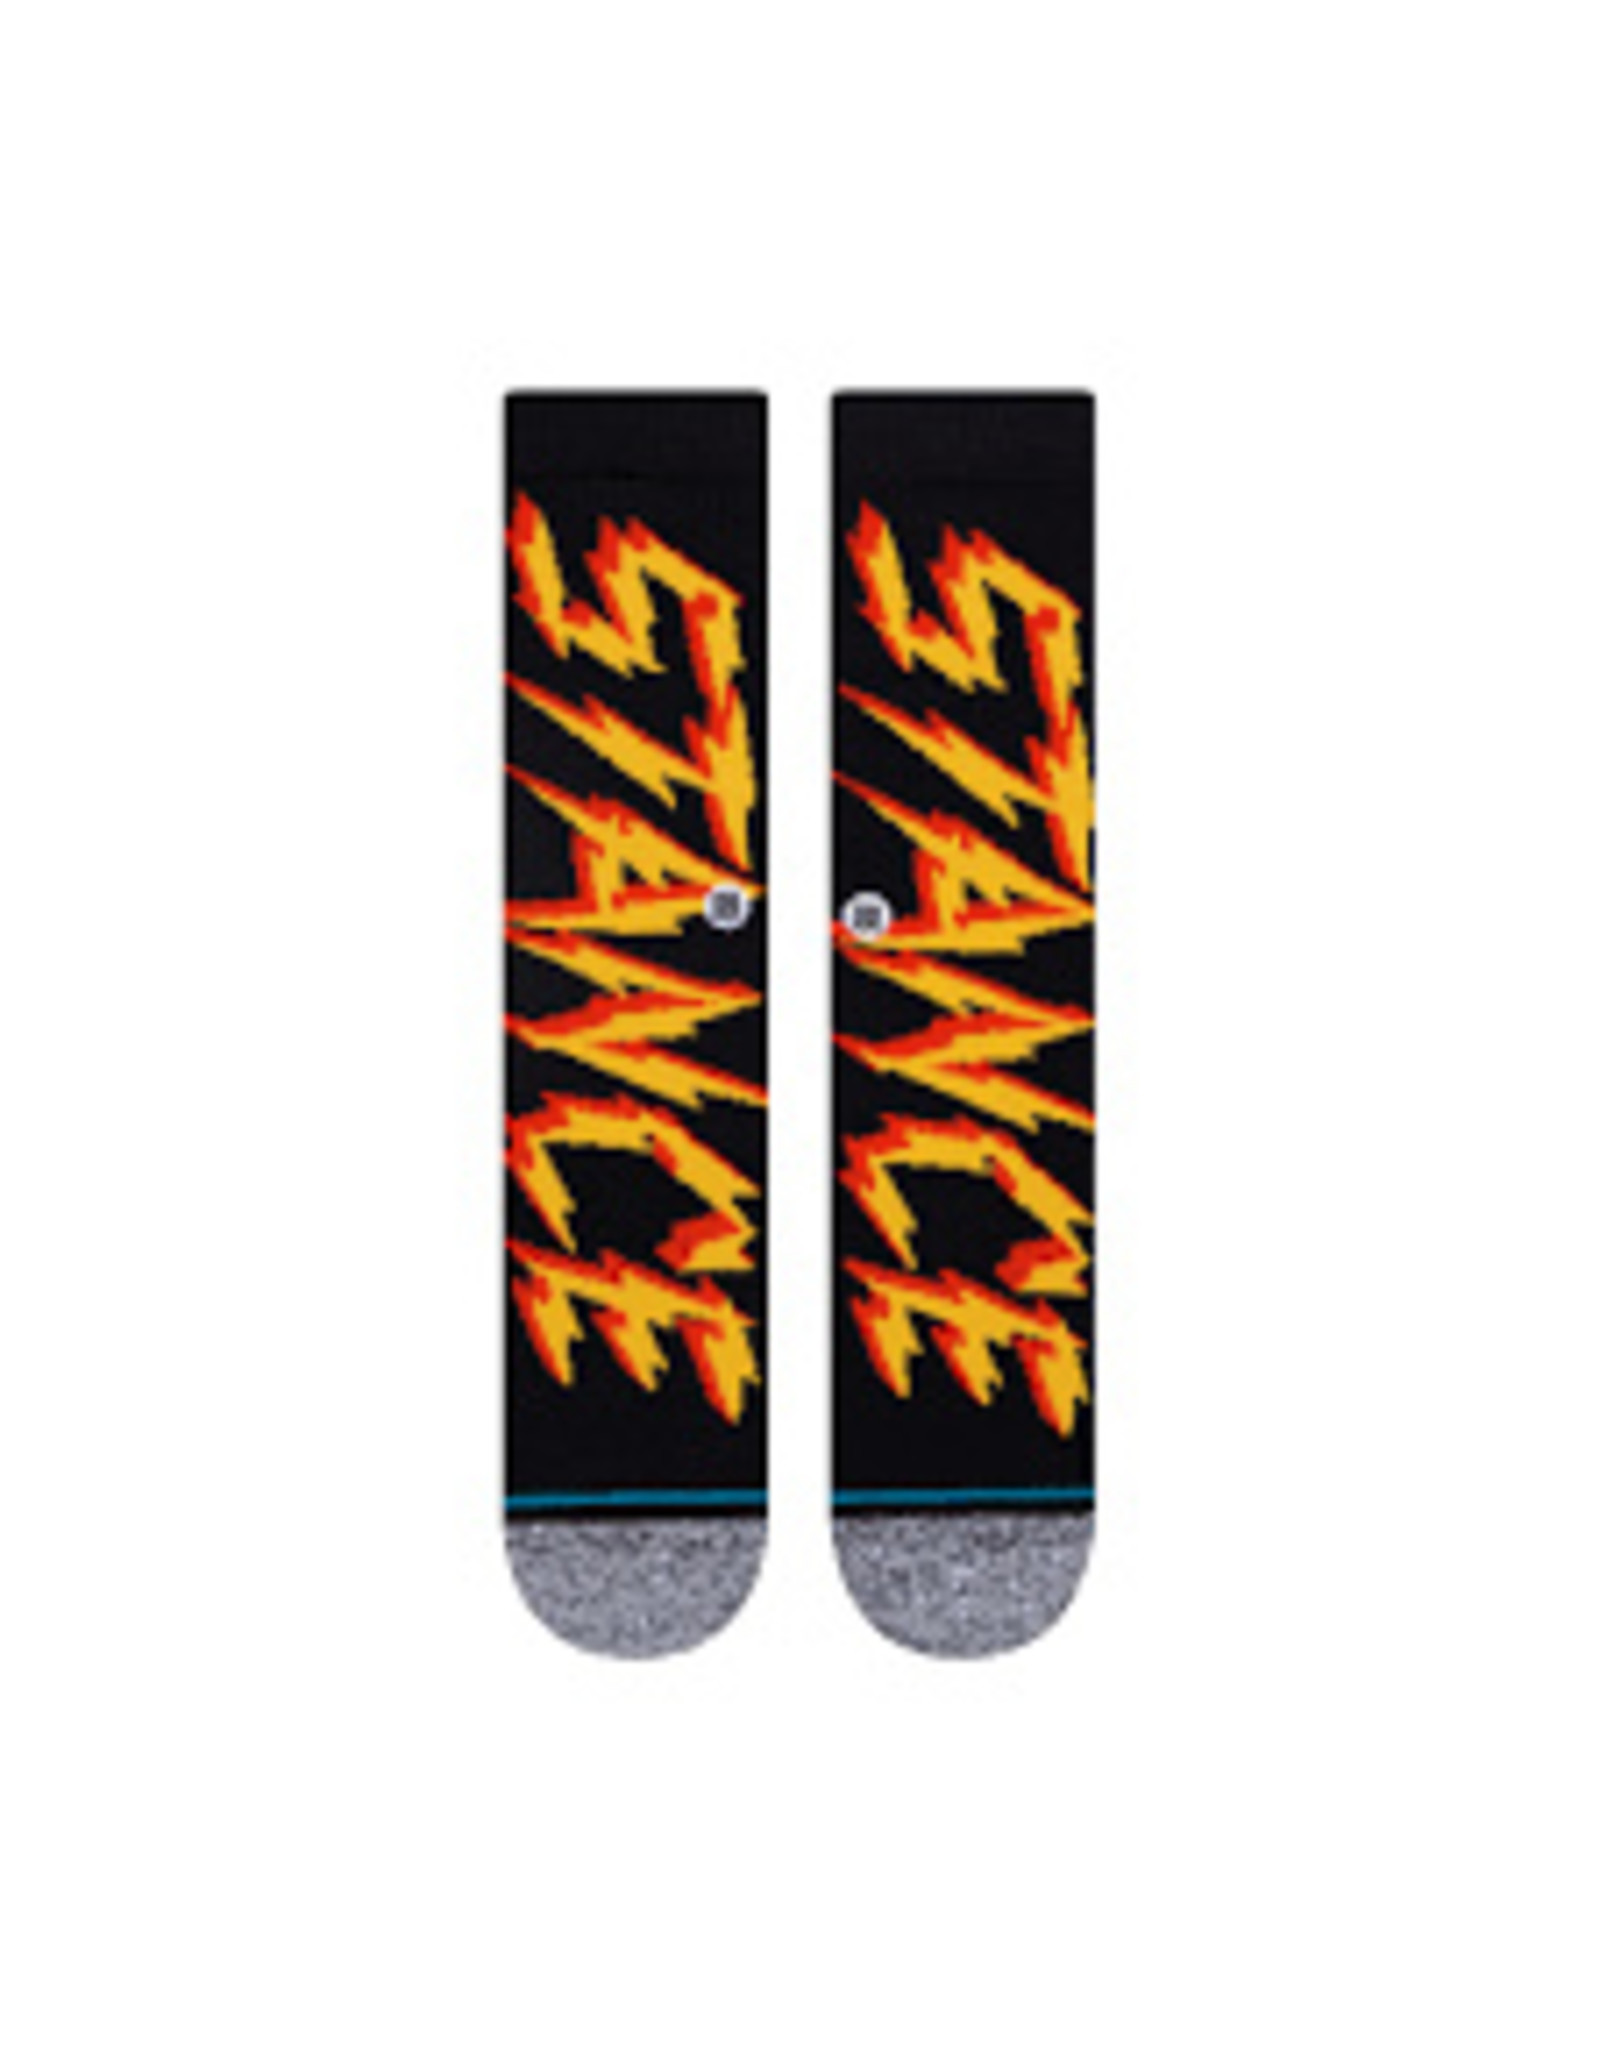 Stance Electrified Casual Socks